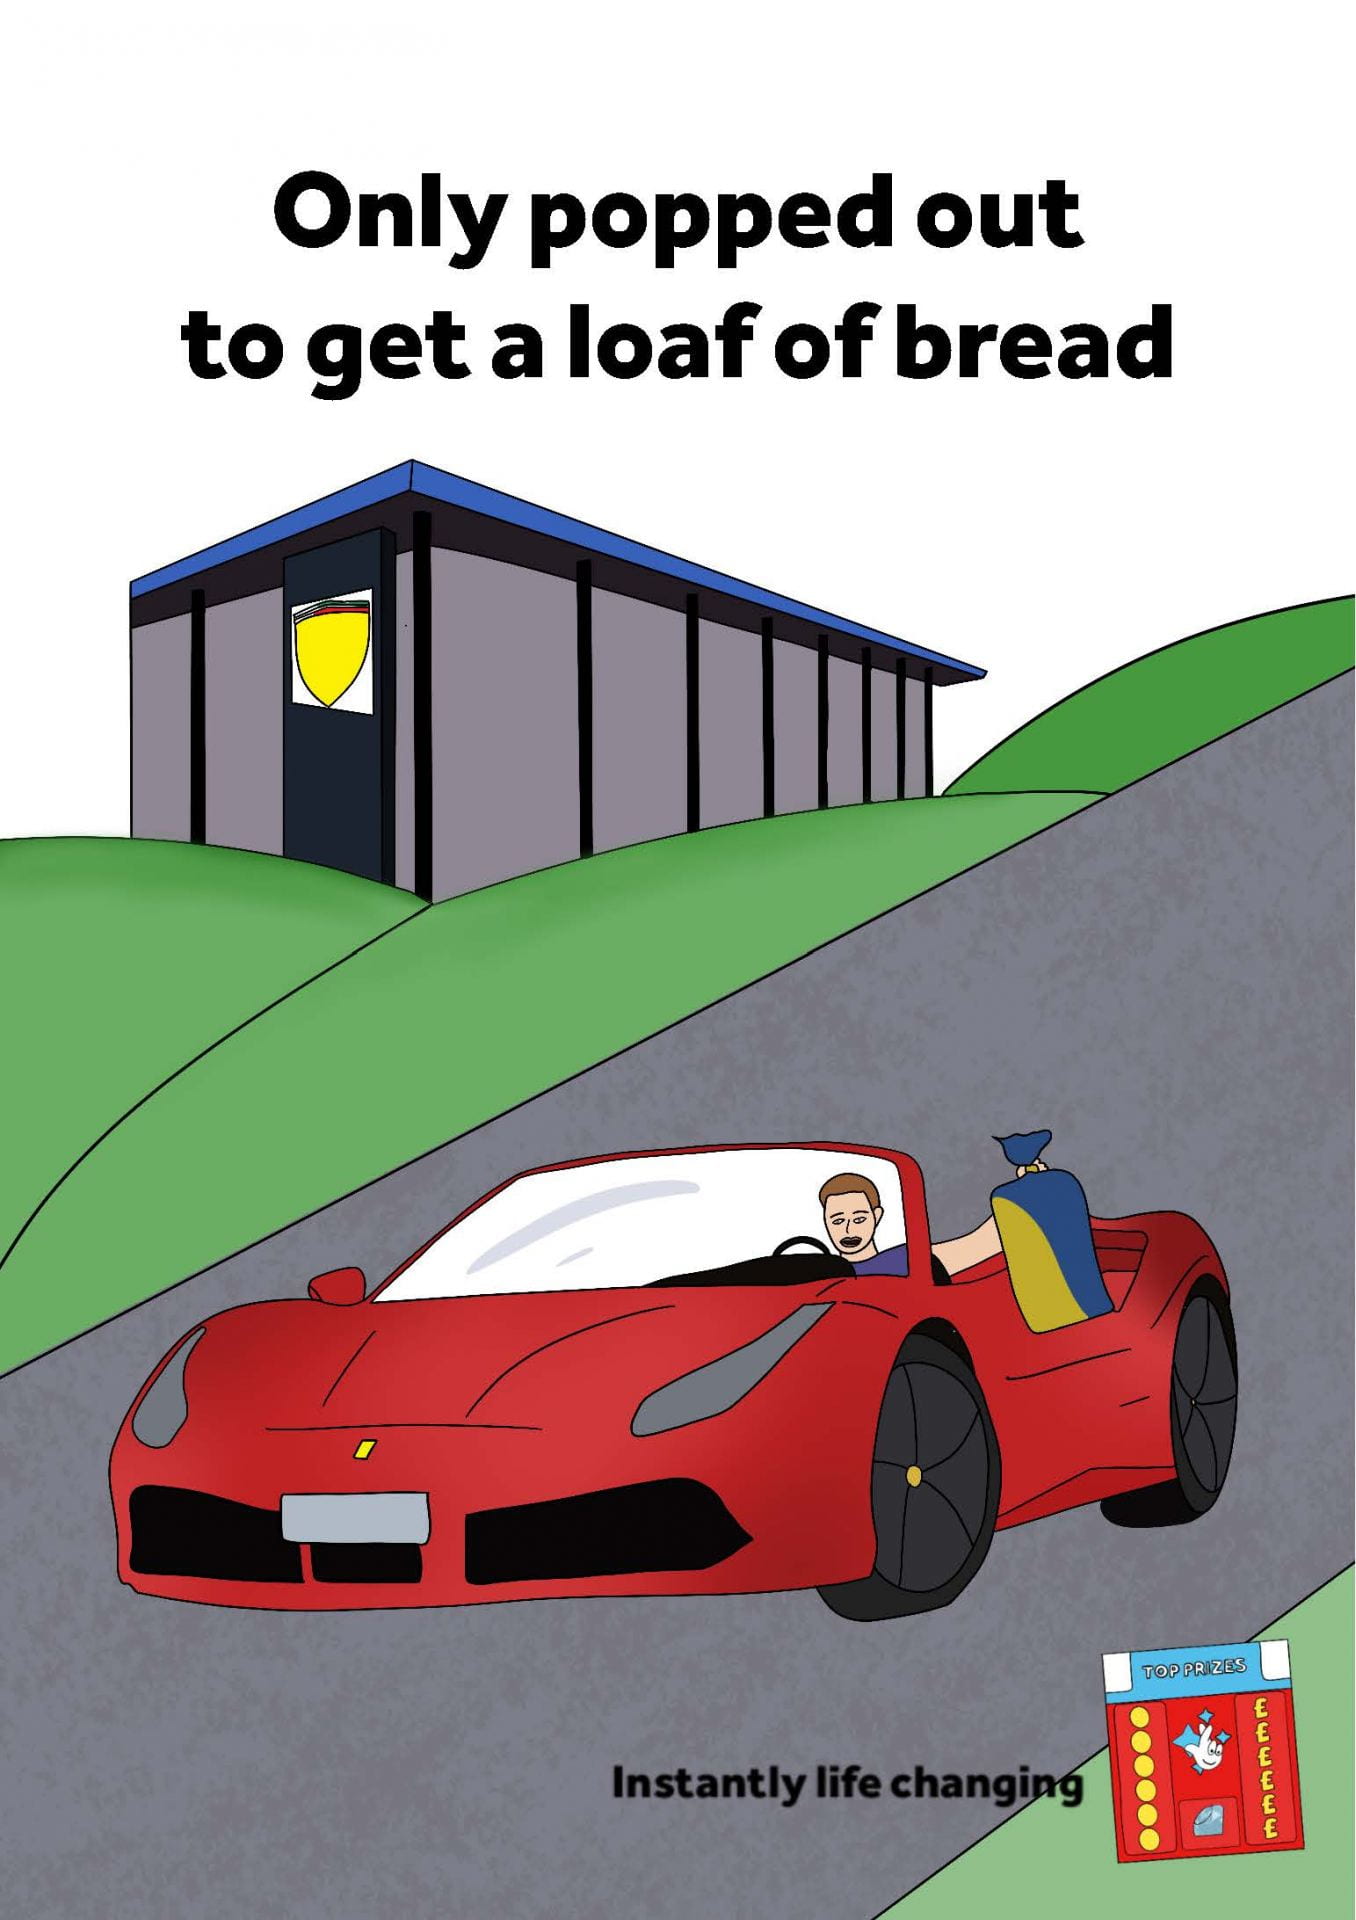 Illustration of a man driving a sports car and holding a loaf of bread with the tagline 'Only popped out to get a loaf of bread' (6-sheet).